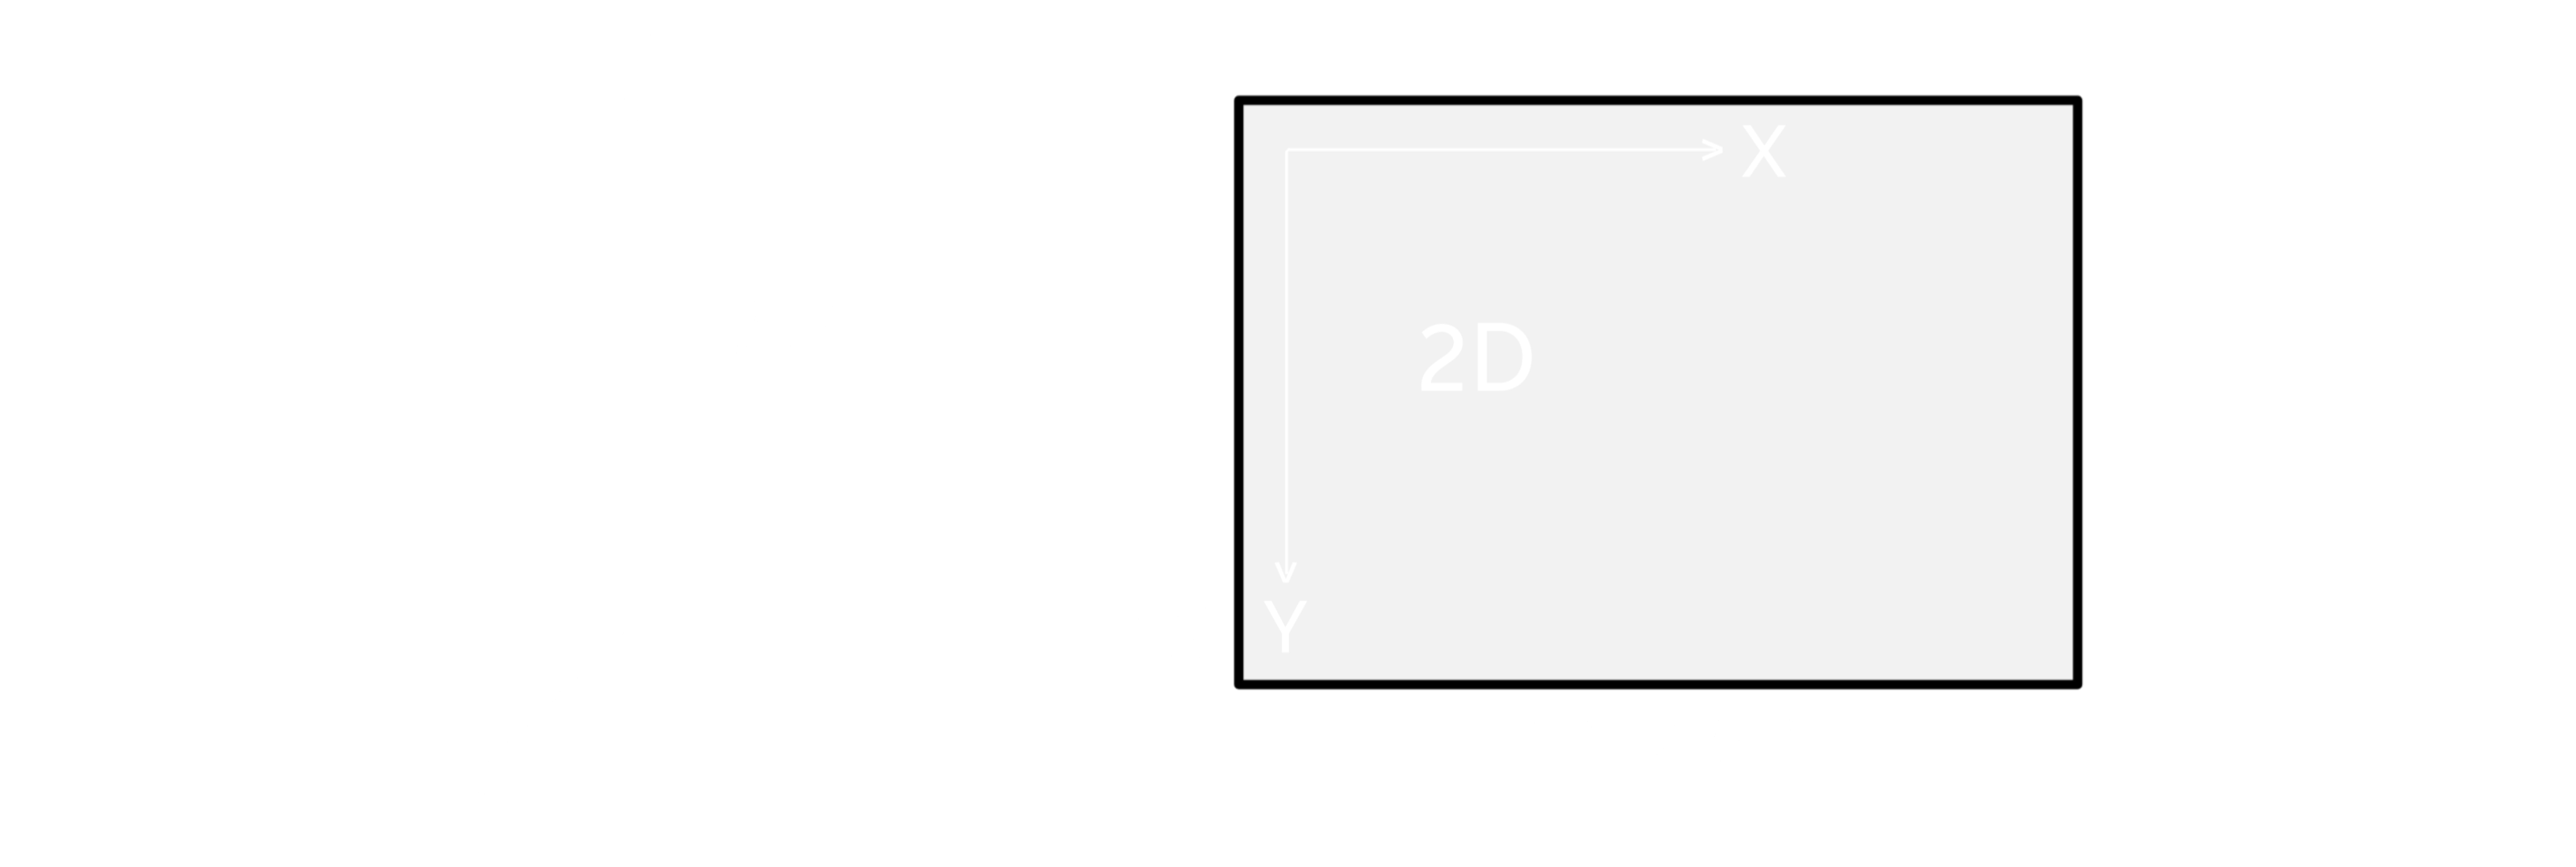 3D space to 2D screen